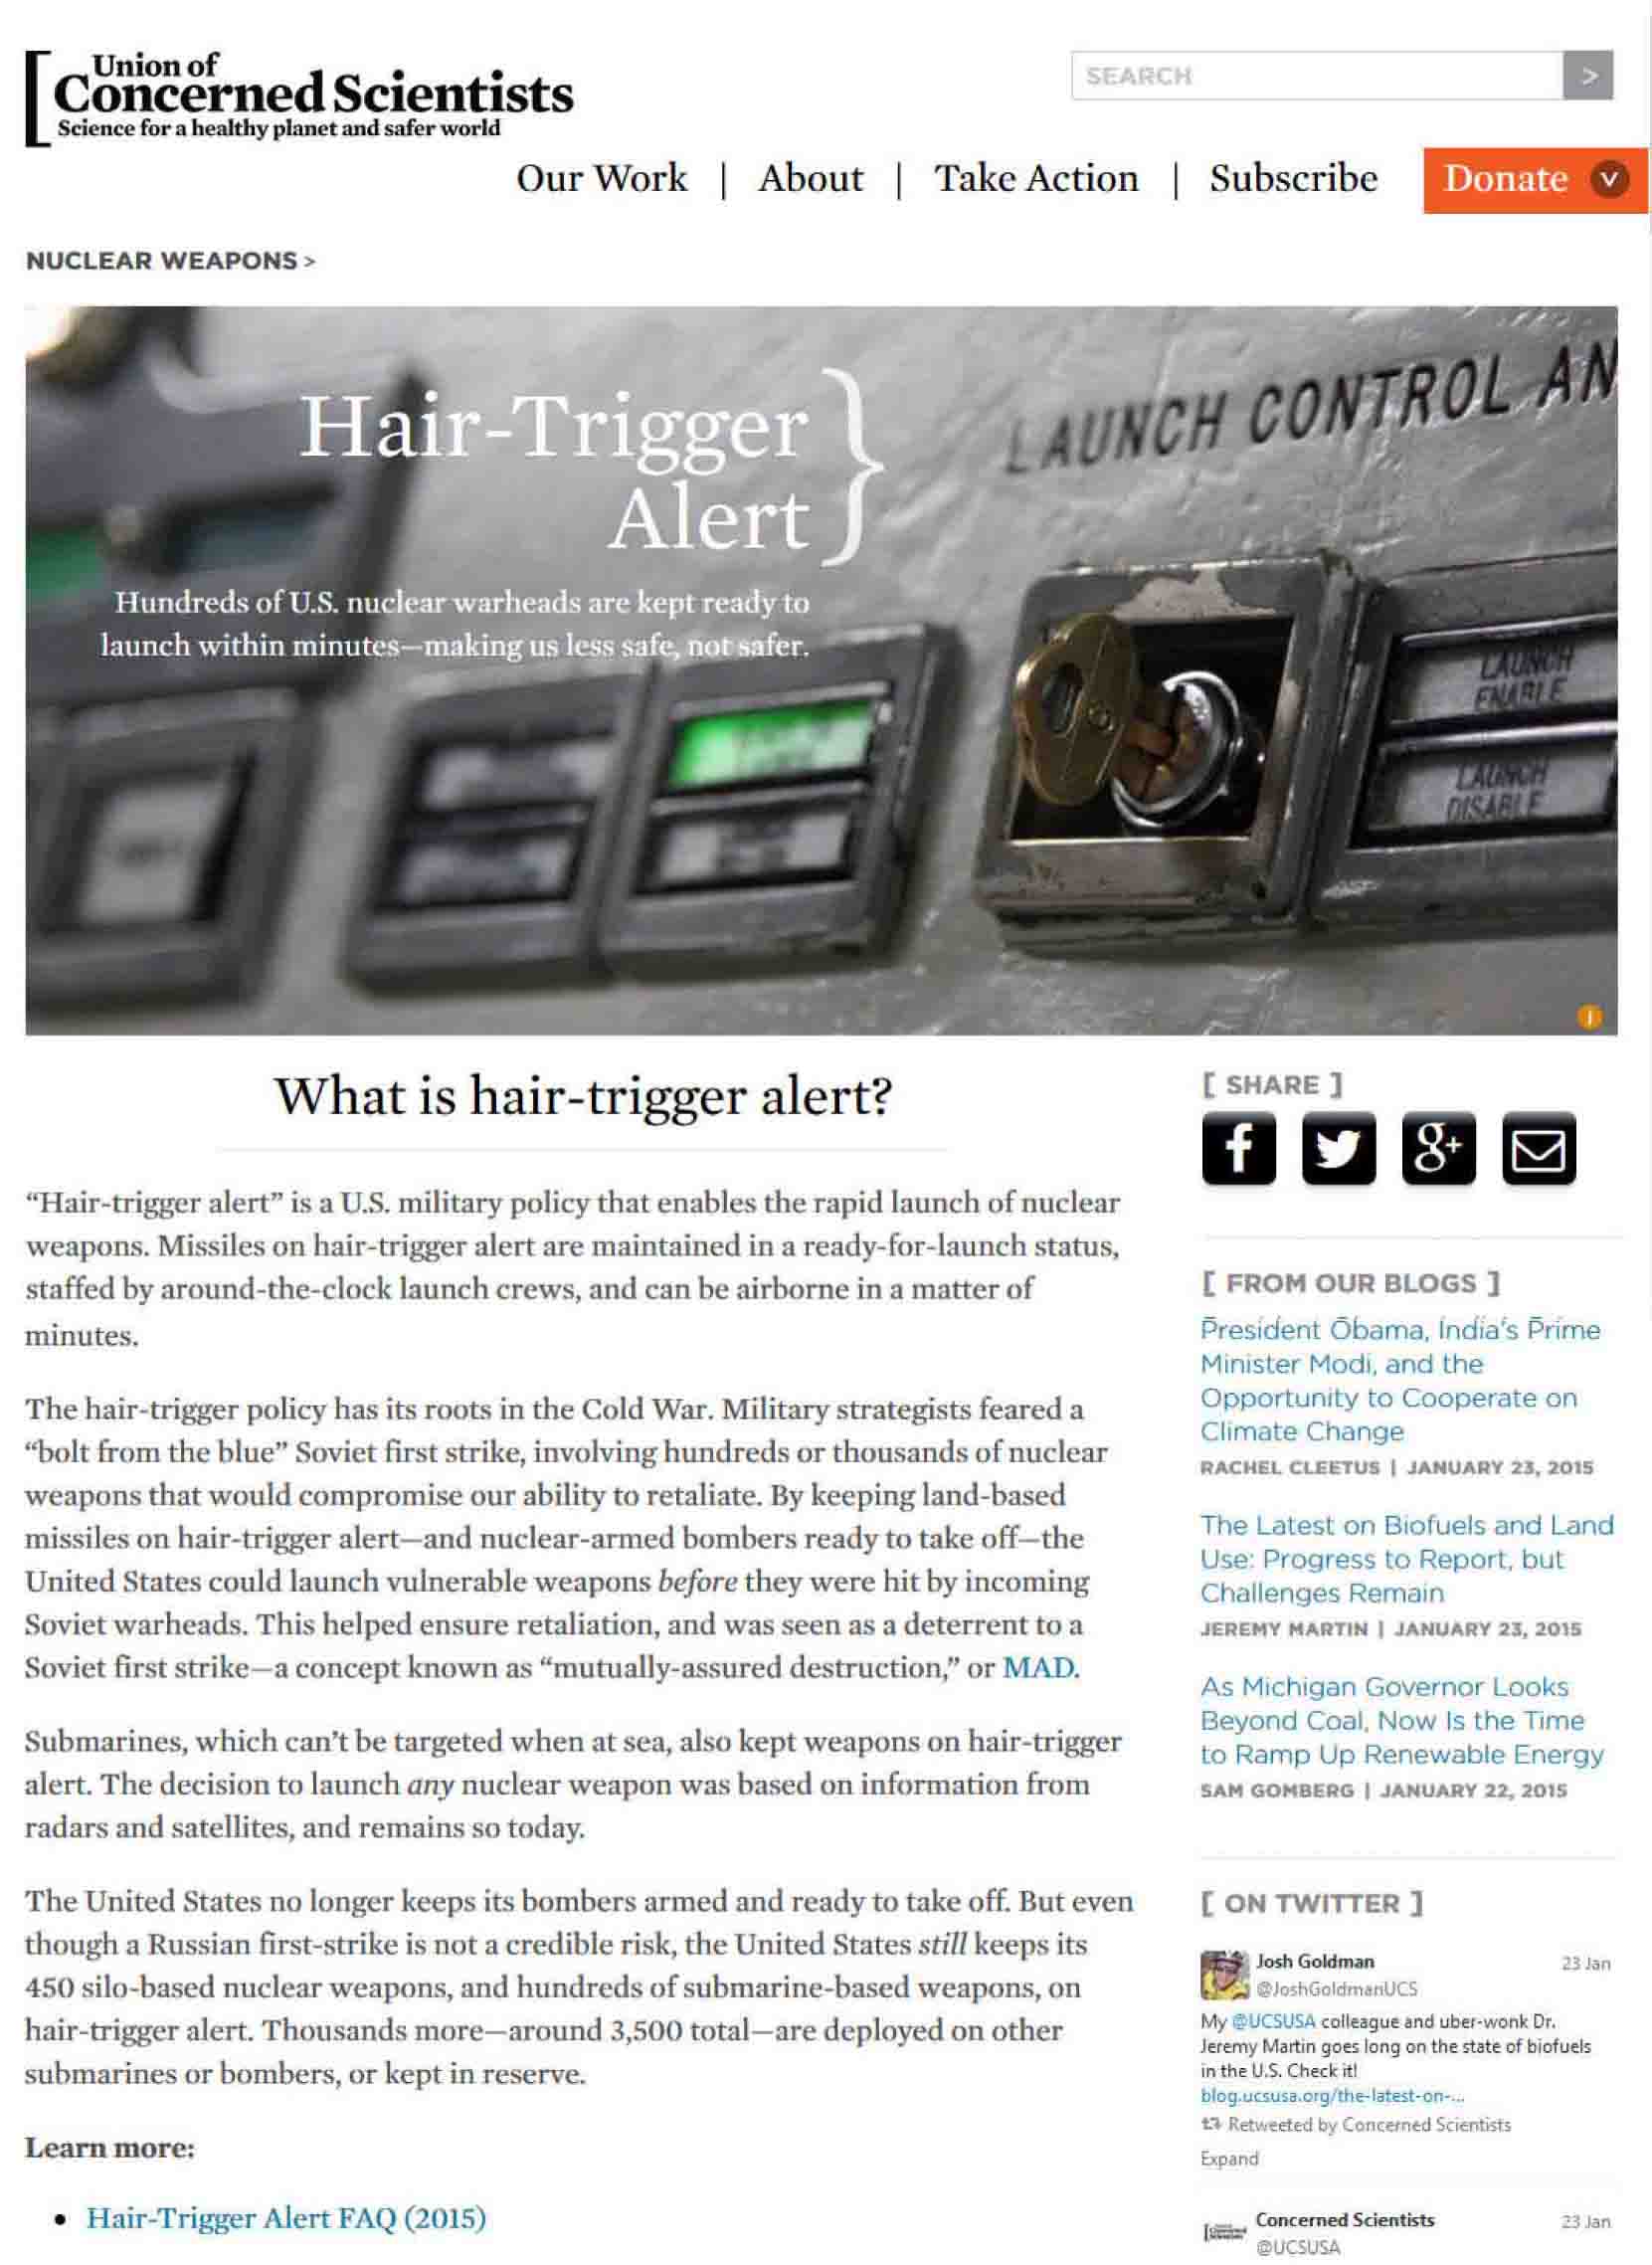 UCS web page for three 2015 factsheets I edited on nuclear weapons on hair-trigger alert